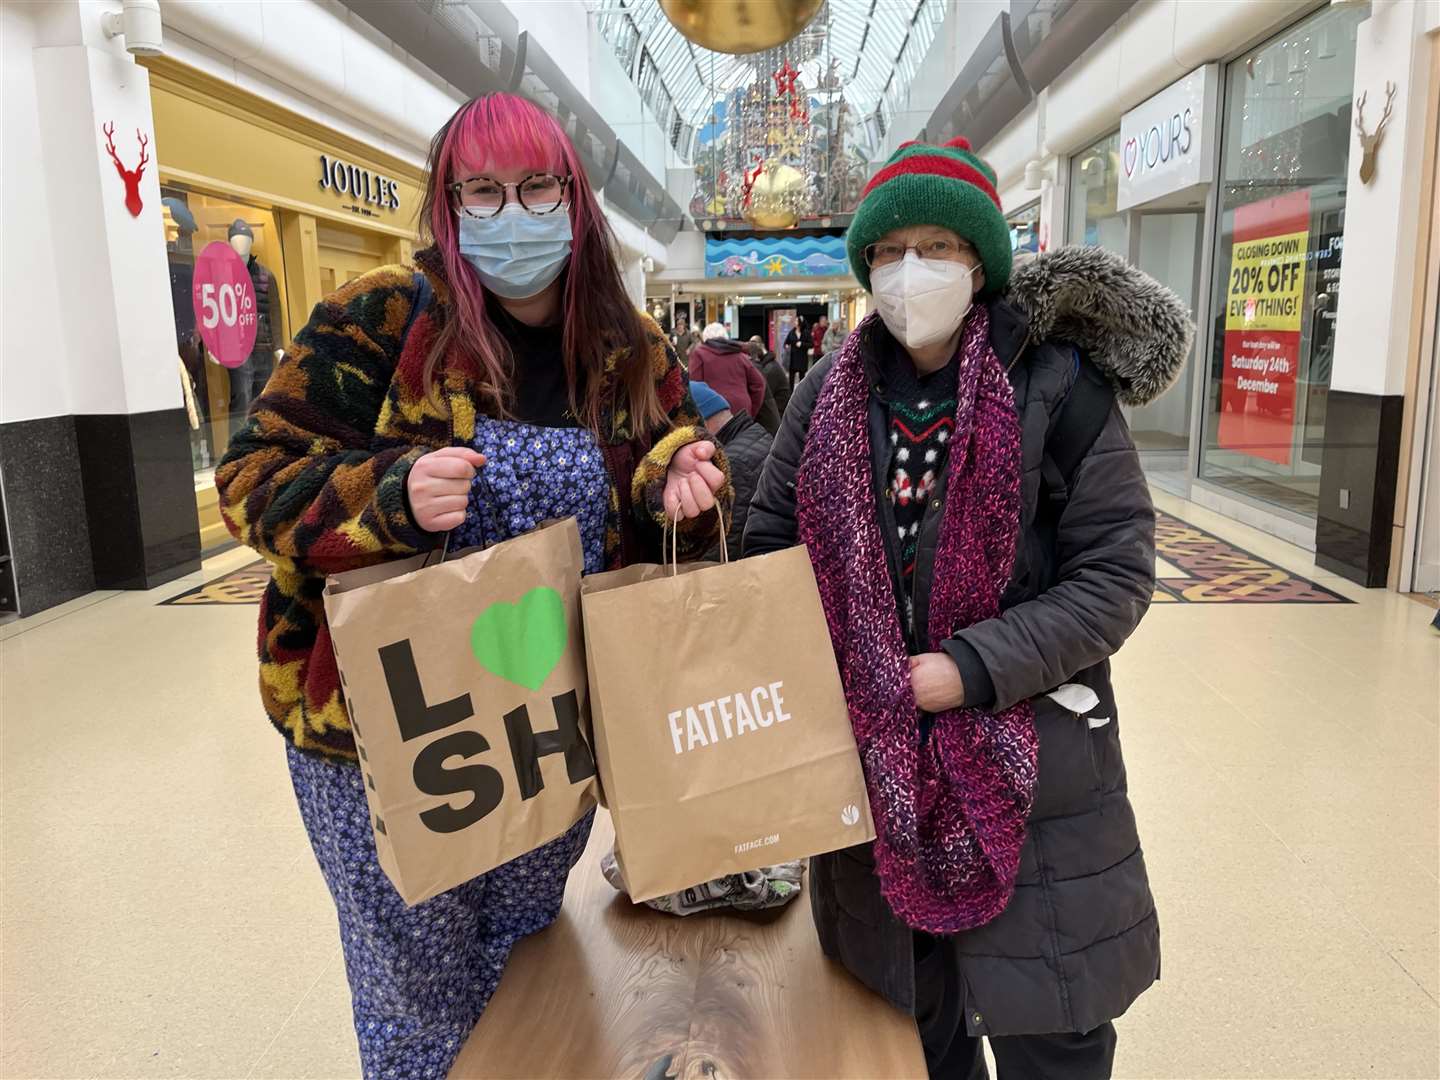 Bargain hunters in Inverness. Ailsa Deans and Meriel Deans from Edinburgh.